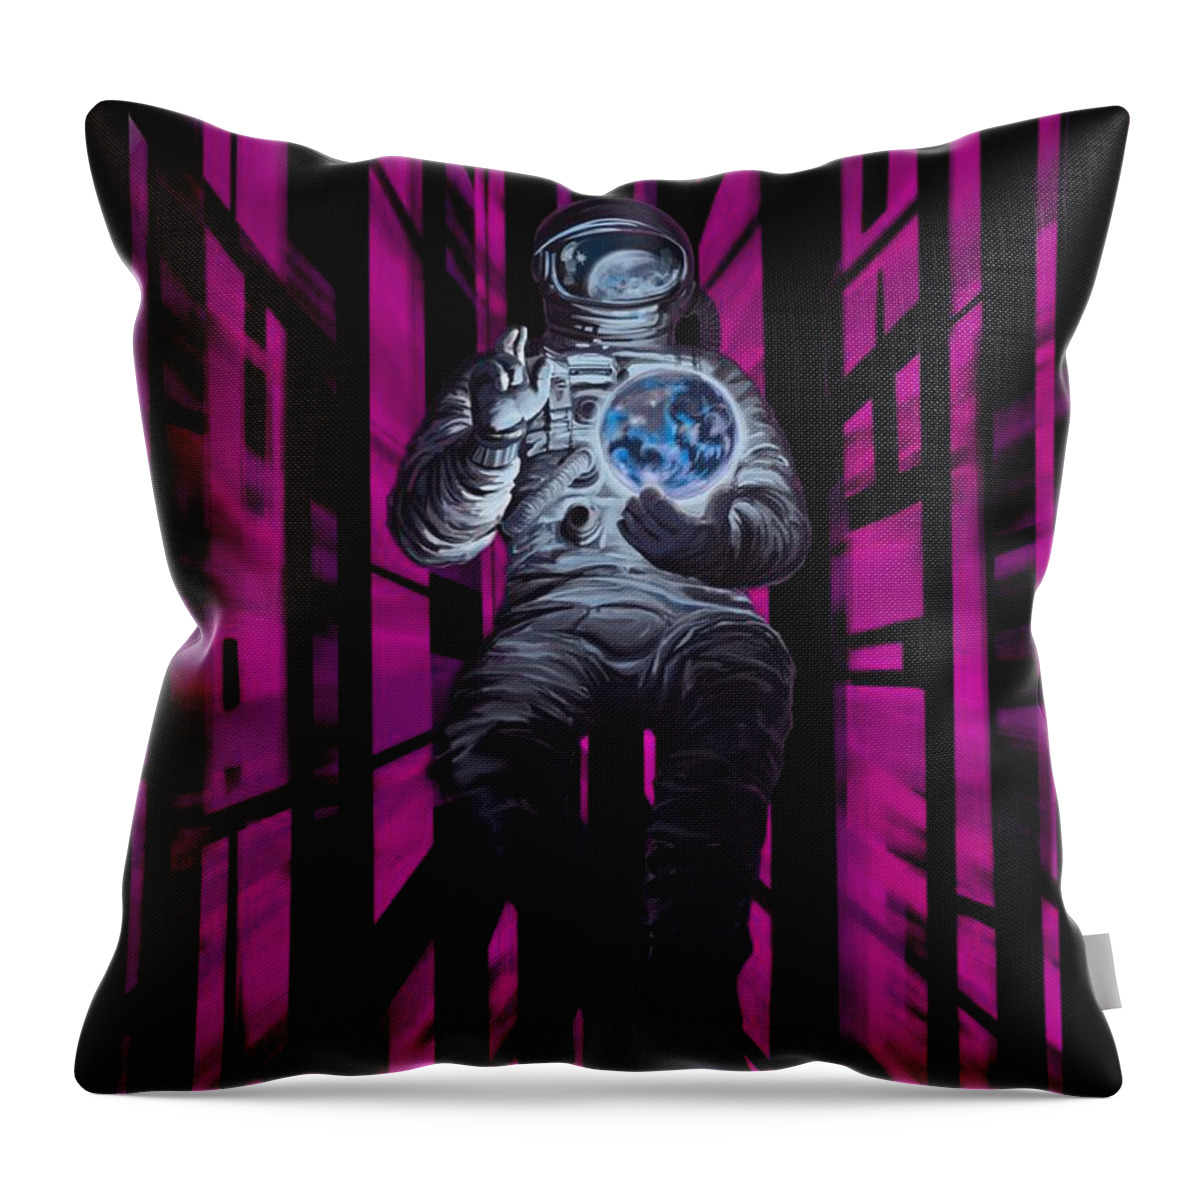 Cosmonaut Throw Pillow featuring the painting Cosmonault by Sassan Filsoof